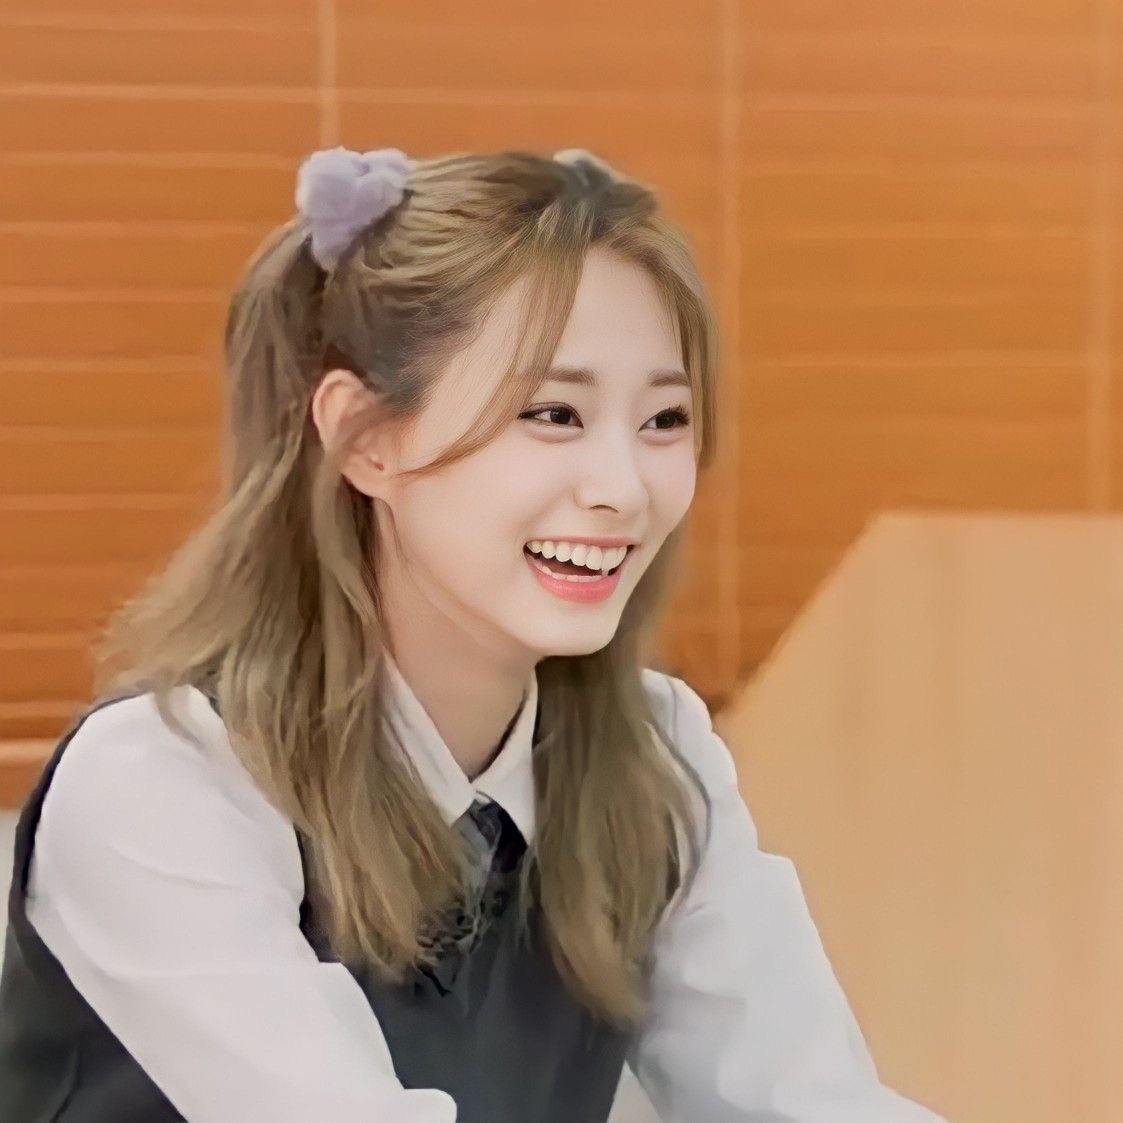 am i the only one with a soft spot for idols with big ears??? i swear they’re just adorable